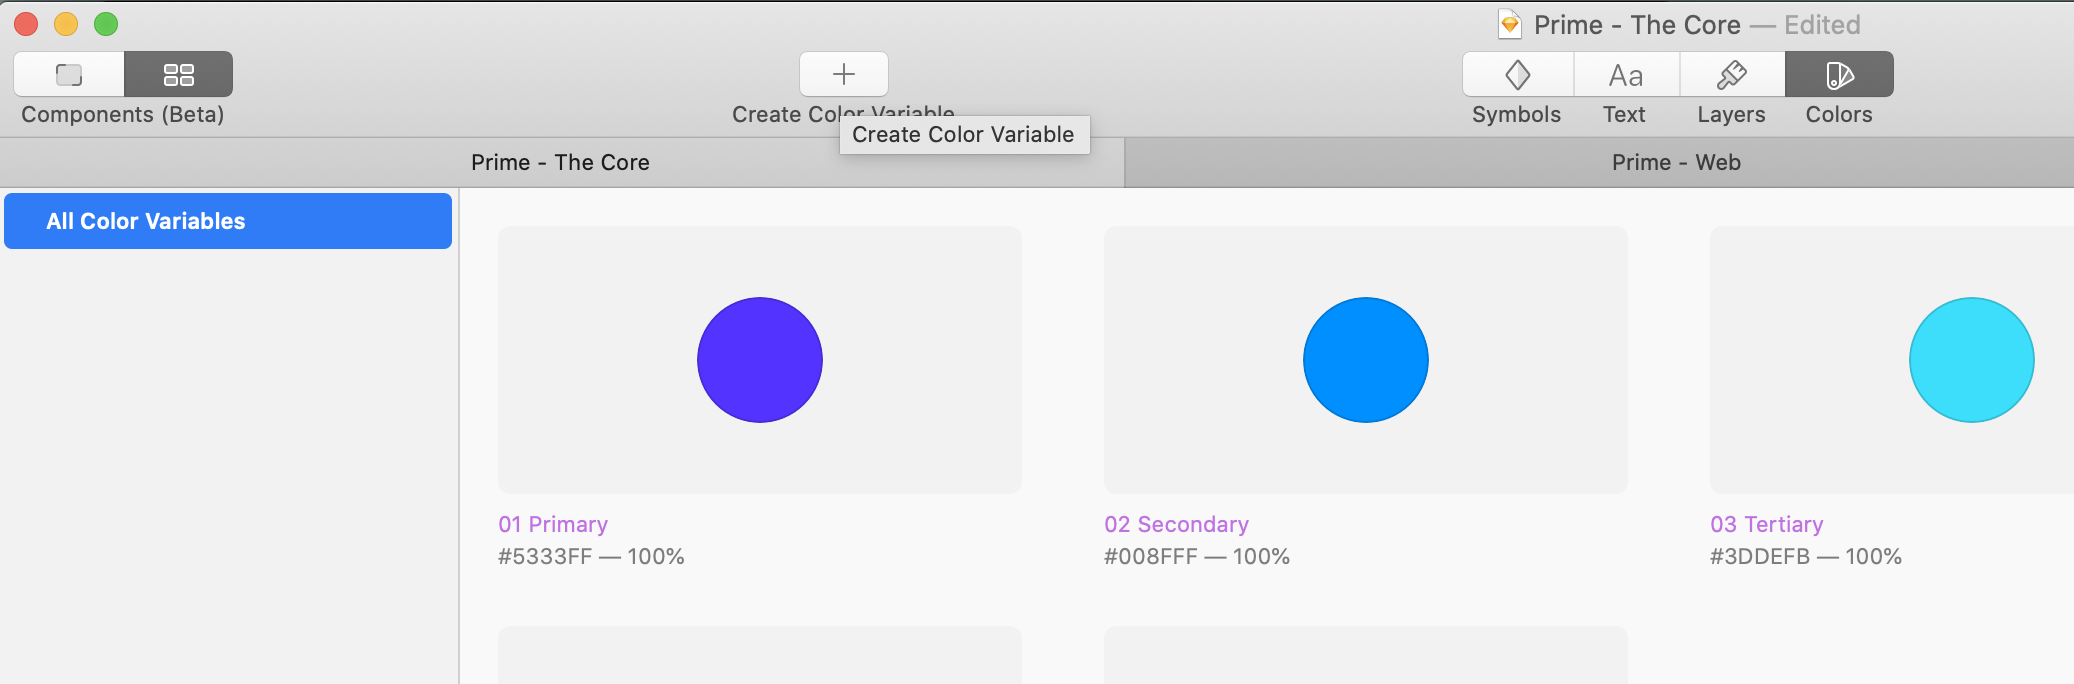 create color variable 2